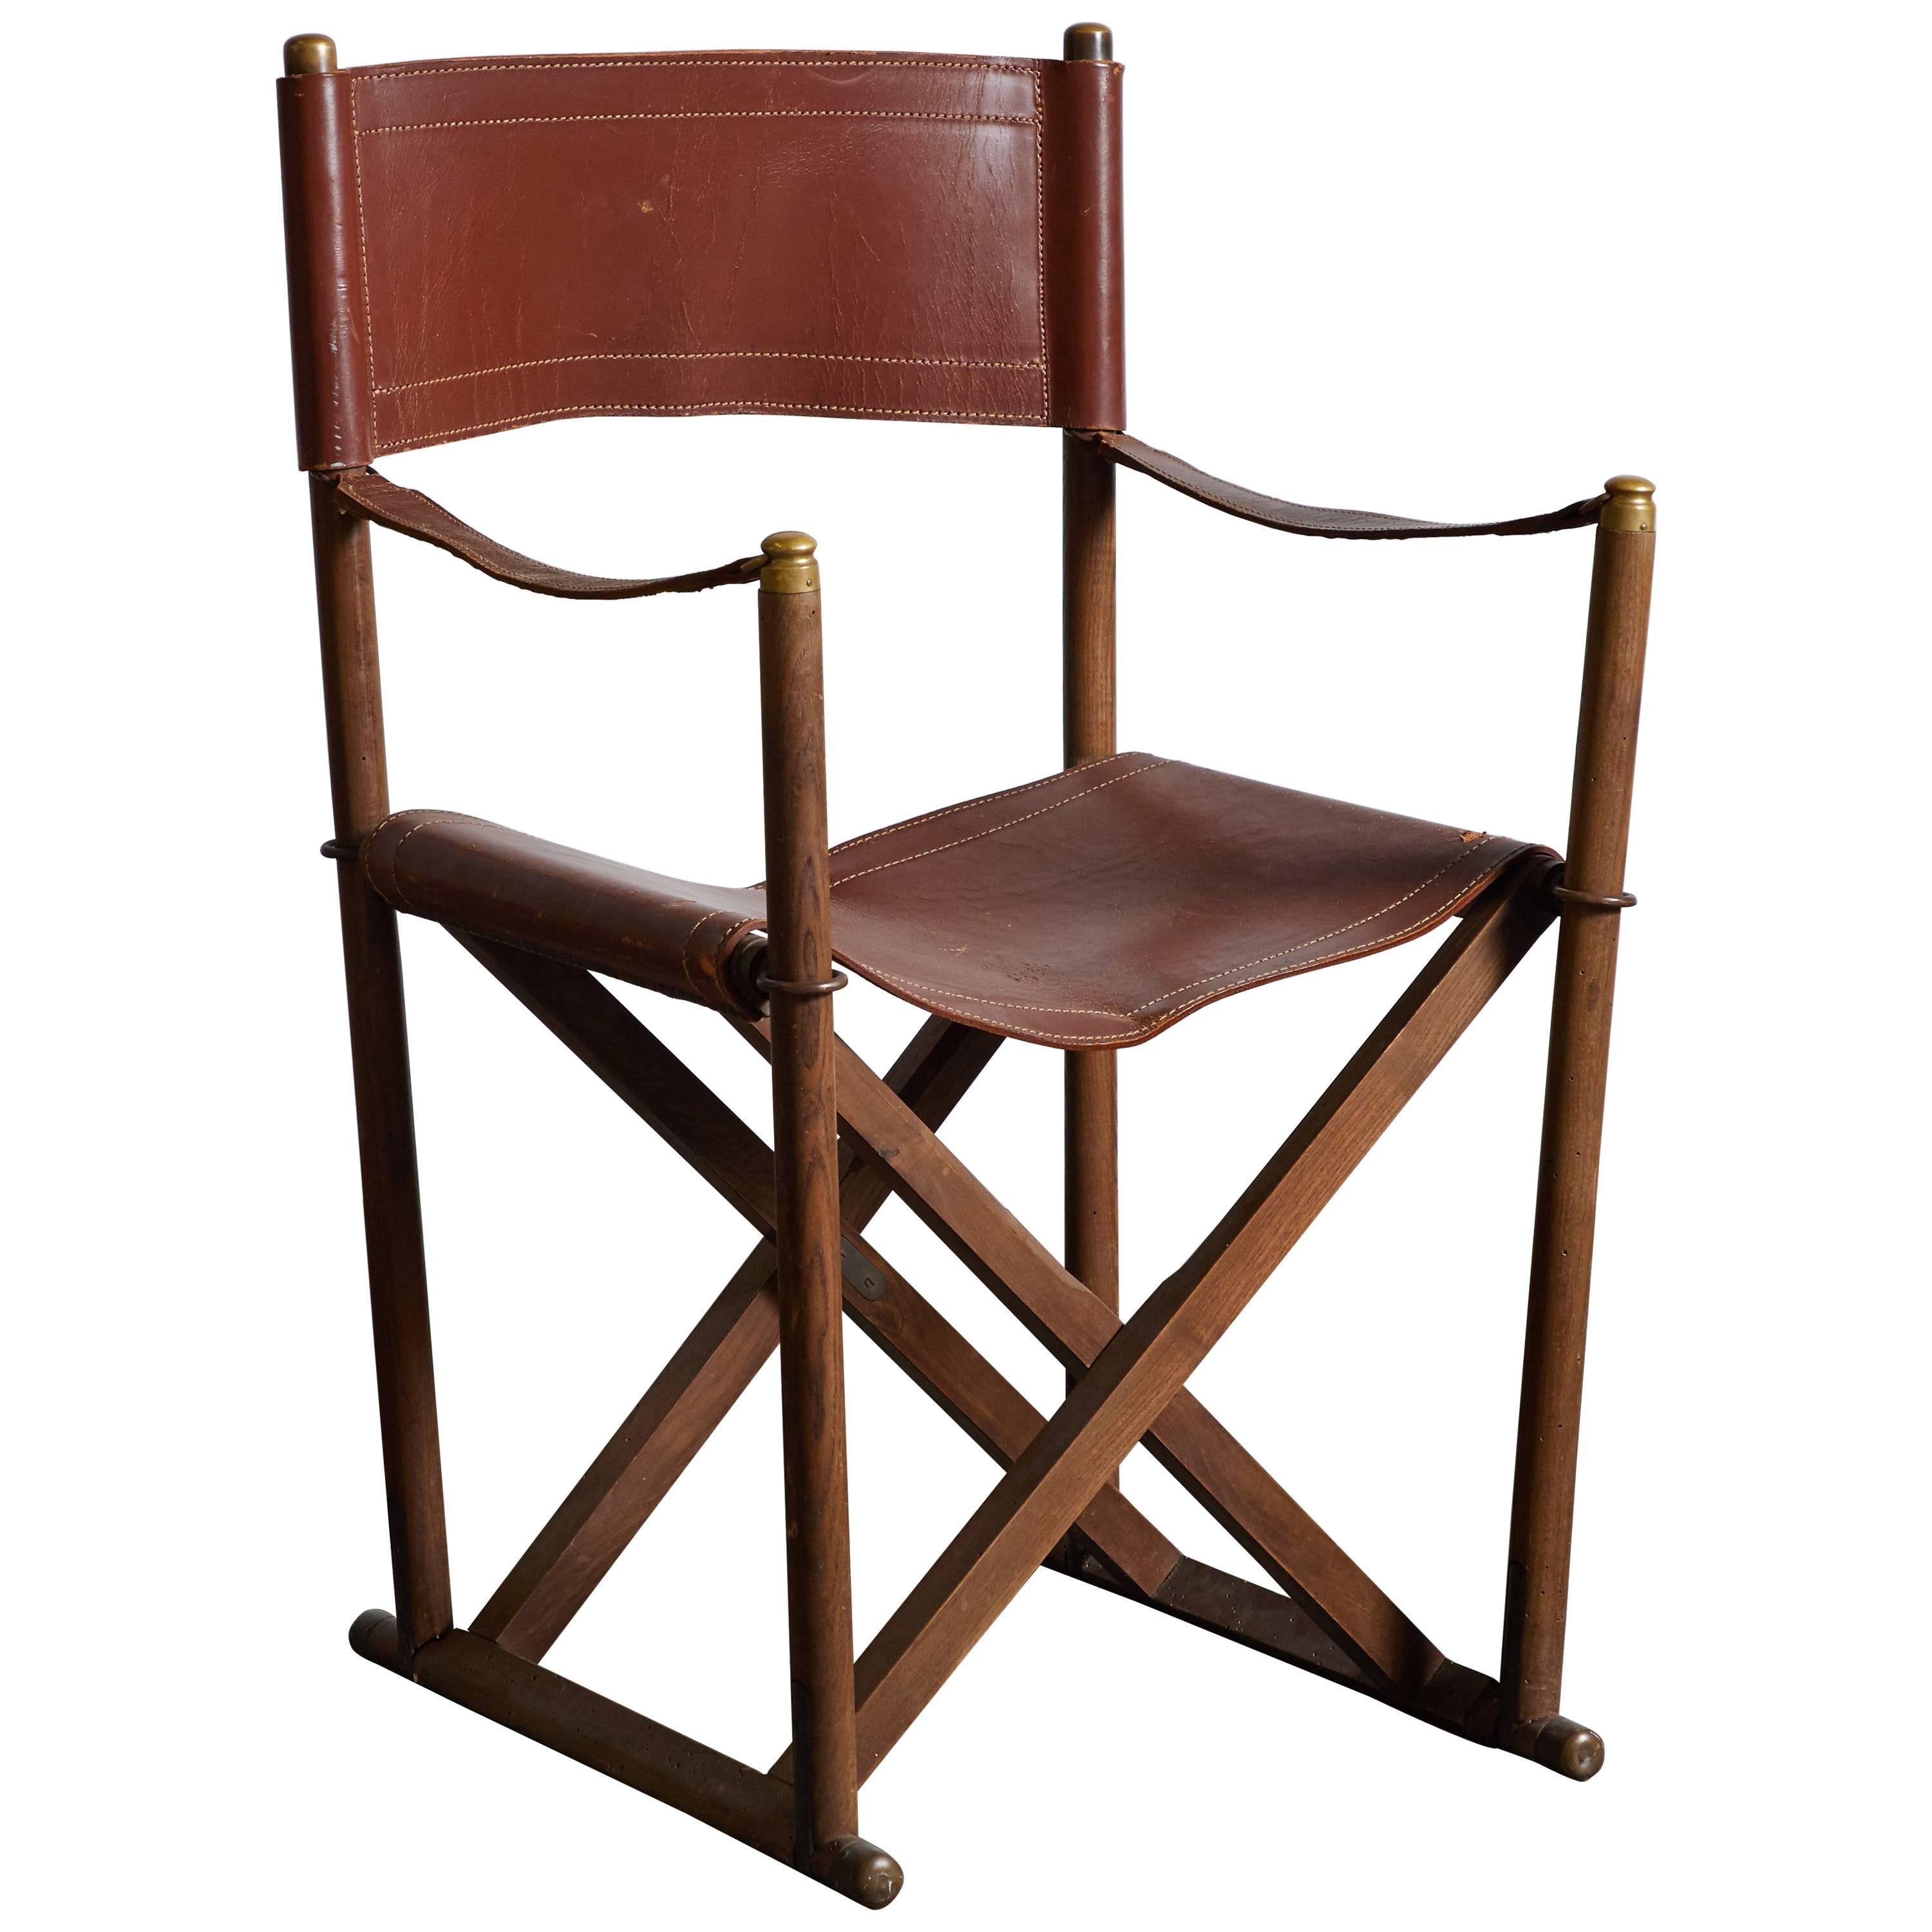 Early MK-16 Leather Campaign Chair by Mogens Koch